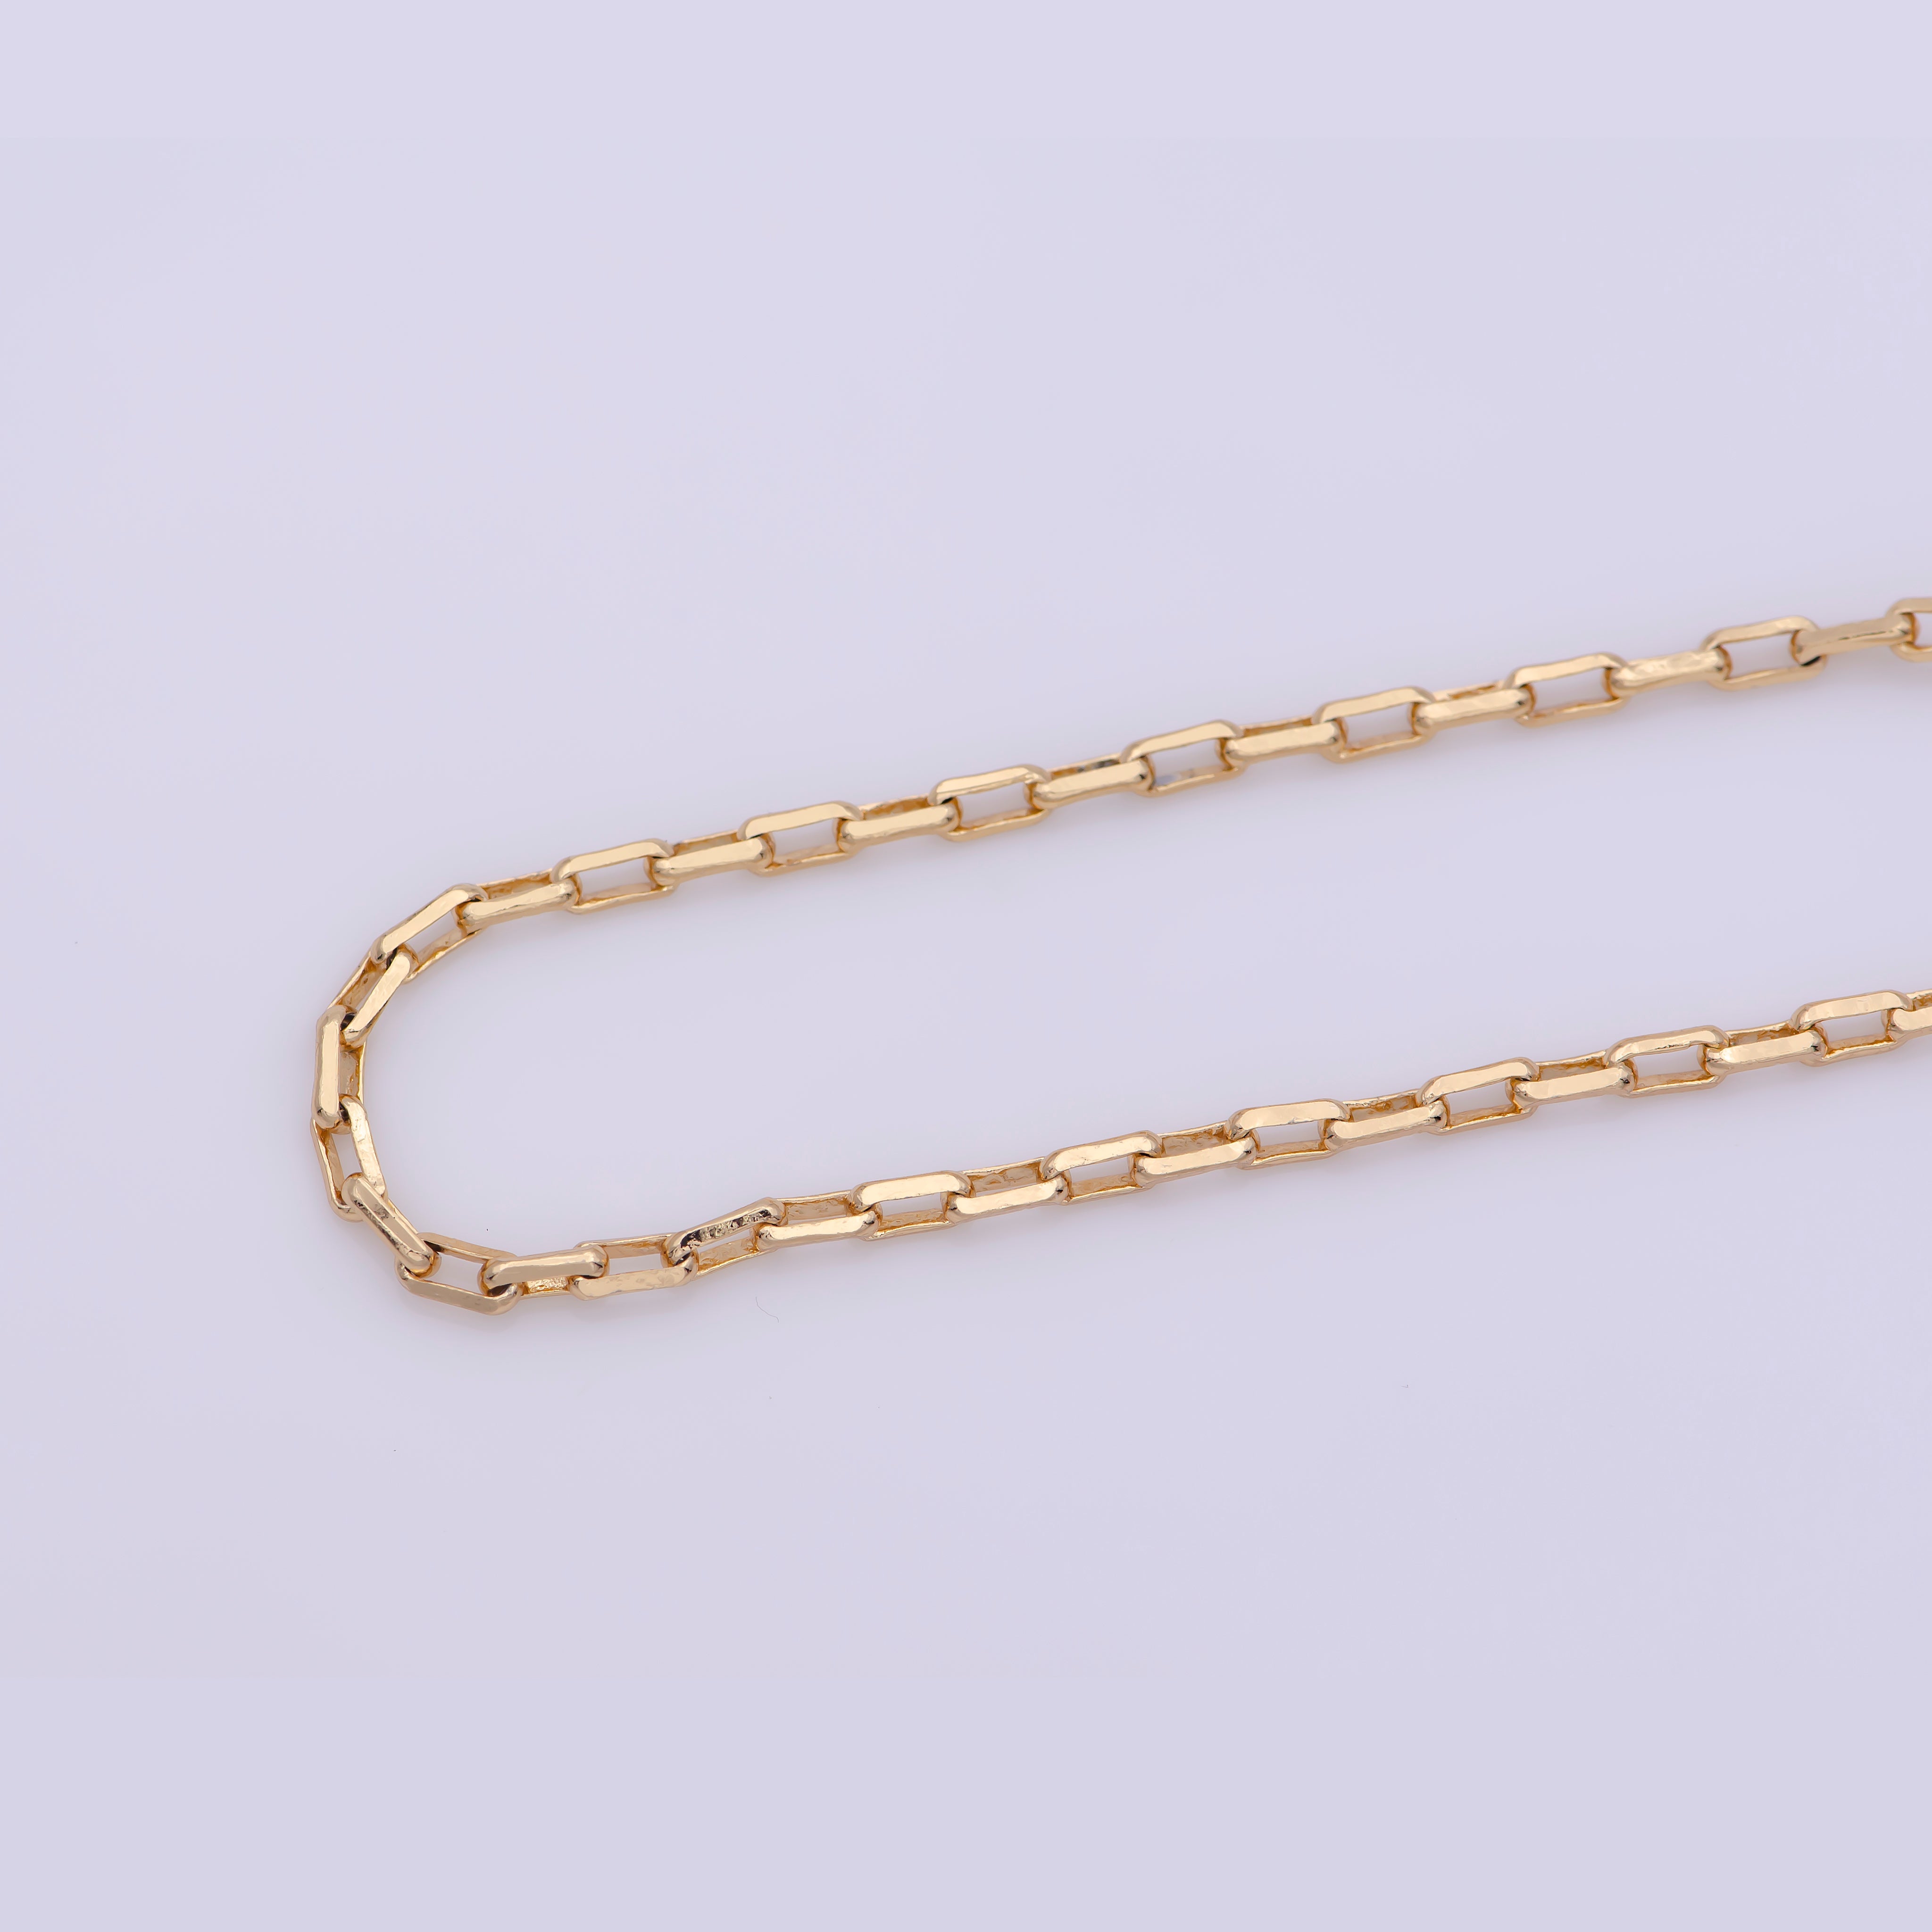 18K Gold Filled Cable Chain Necklace, 19.6Inch Cable Finished Chain For Jewelry Necklace Making, Dainty 2.5mm Cable Necklace w/Lobster Clasps | CN-737 - DLUXCA